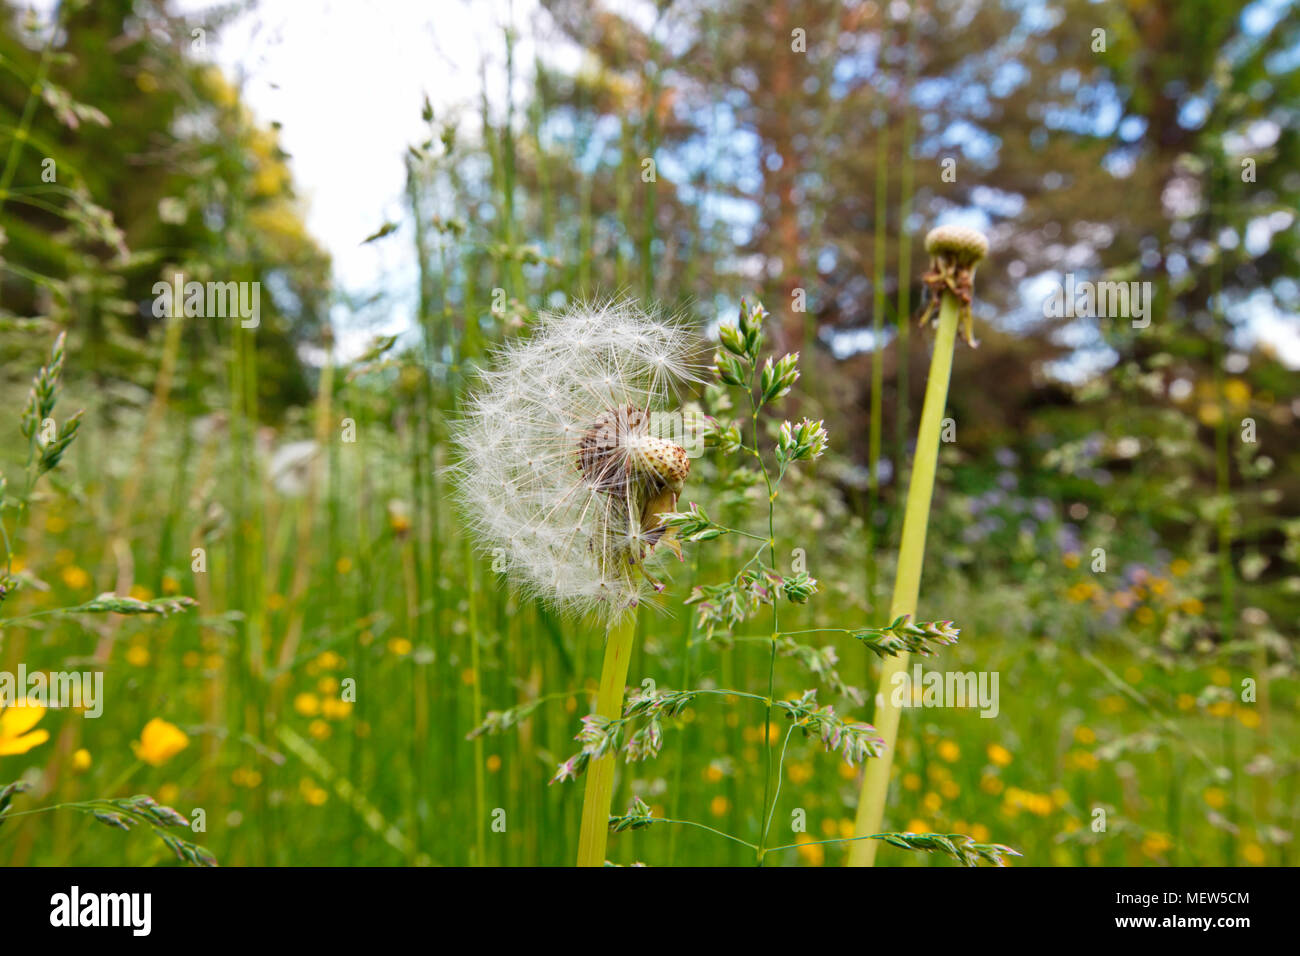 Close up of a dandelion blow ball in a meadow Stock Photo